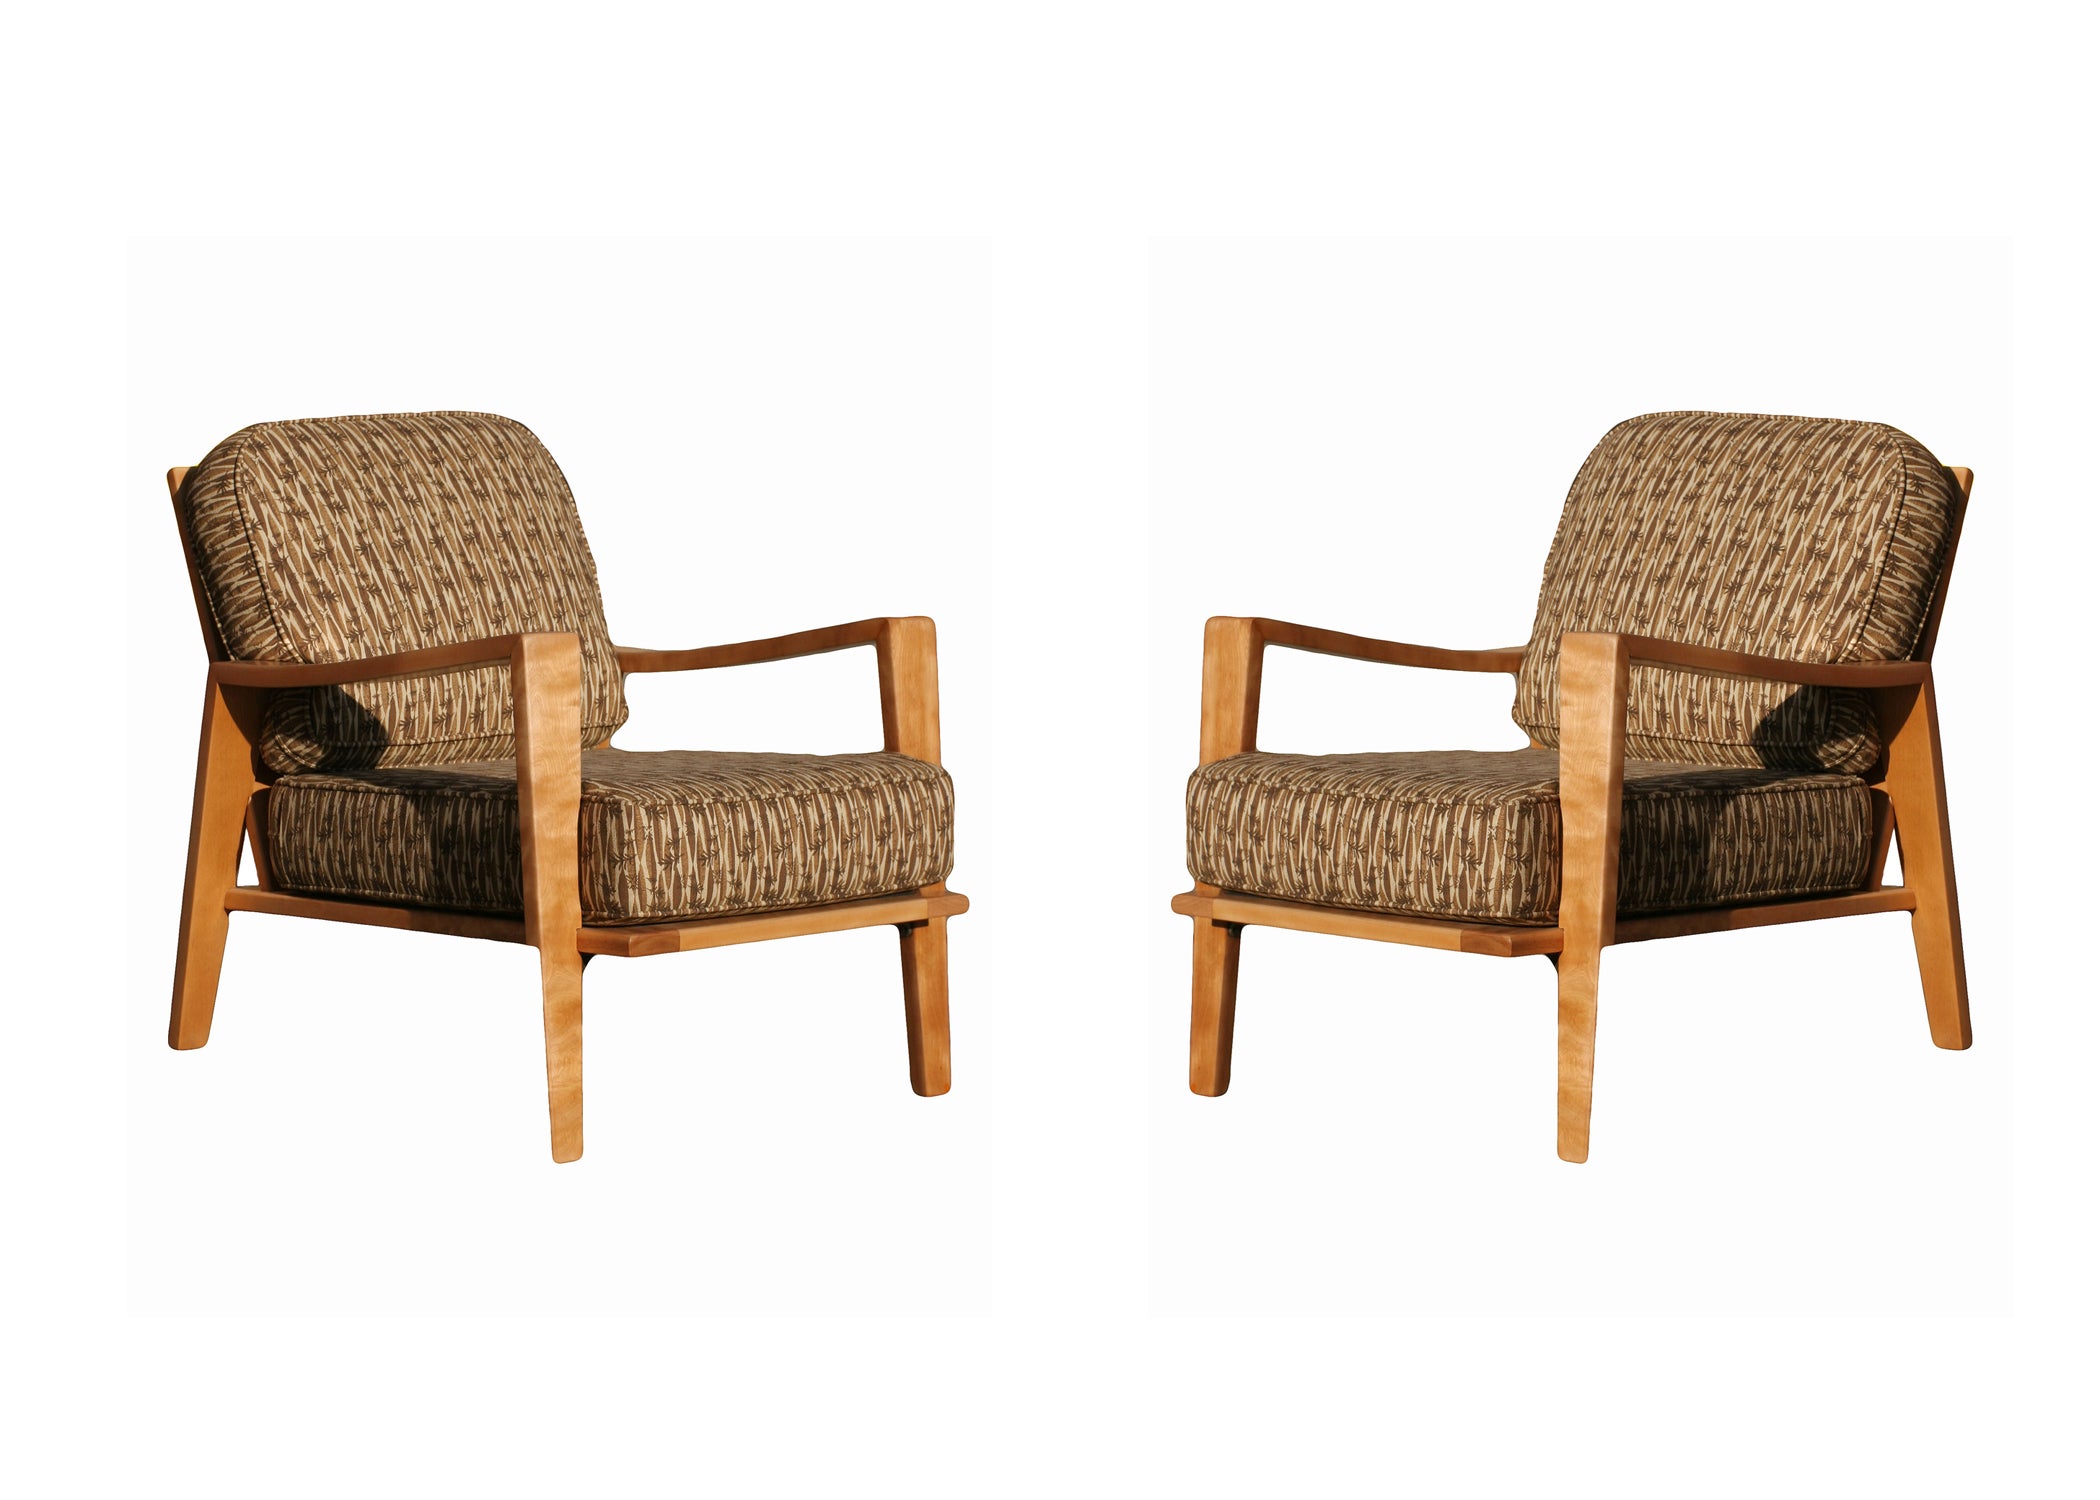 Russel Wright Open Armchairs for Conant-Ball, Pair